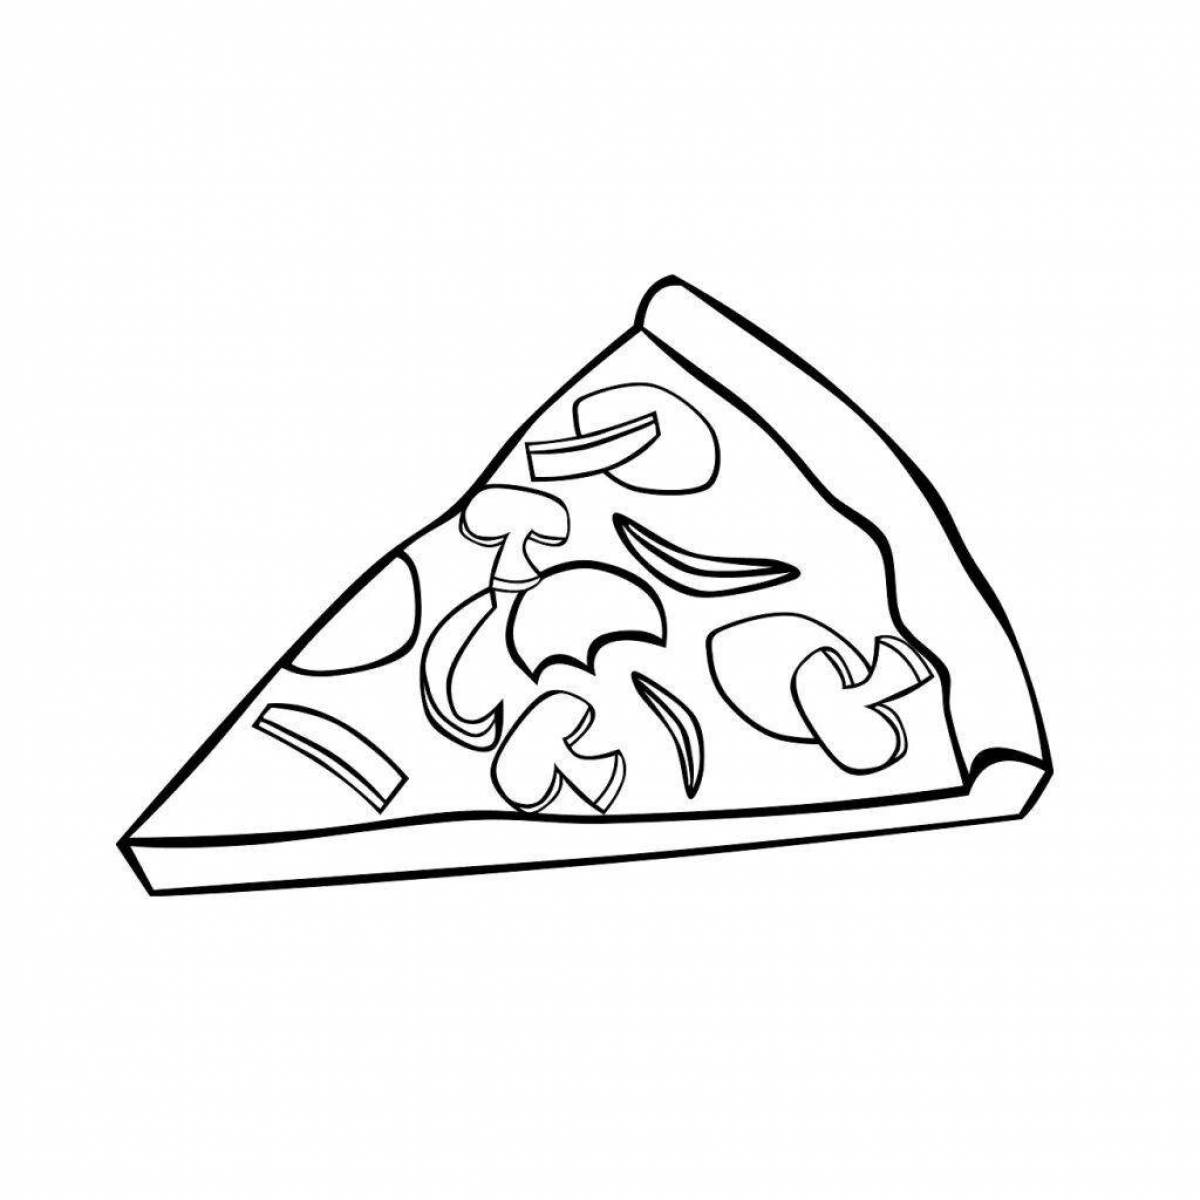 Coloring appetizing artistic pizza